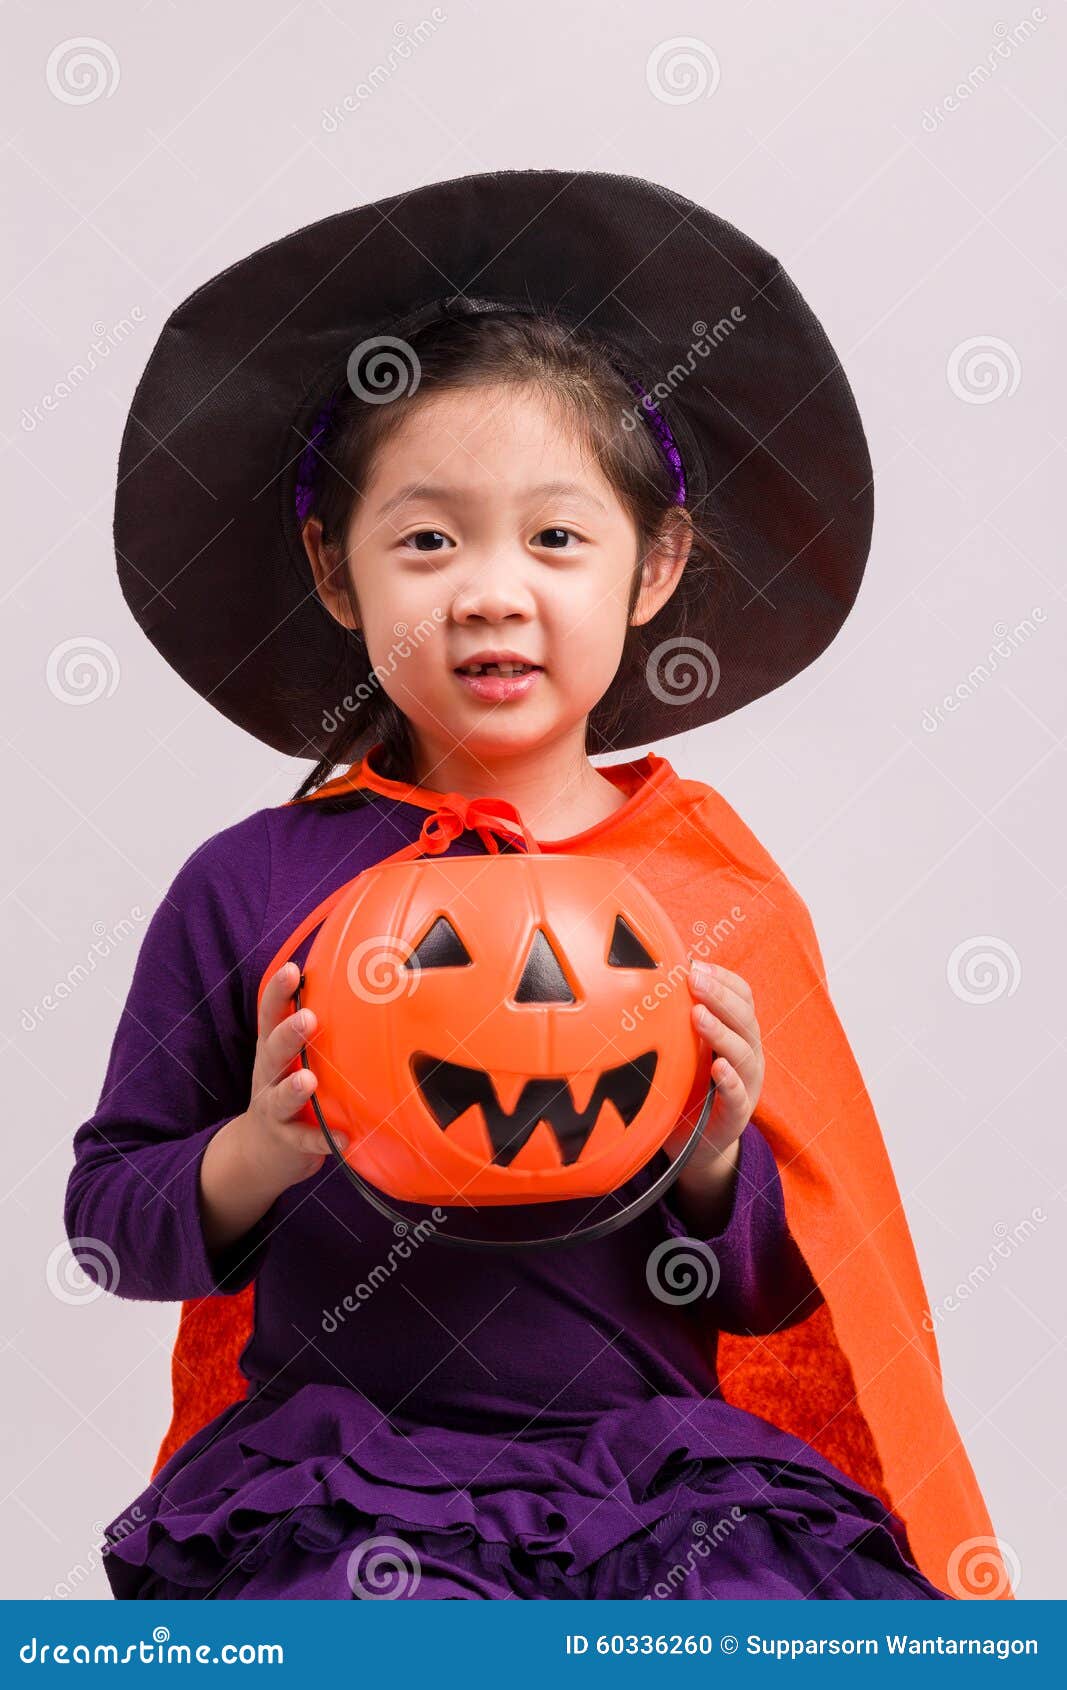 Child in Fancy Costume on White / Child in Fancy Costume Stock Photo ...